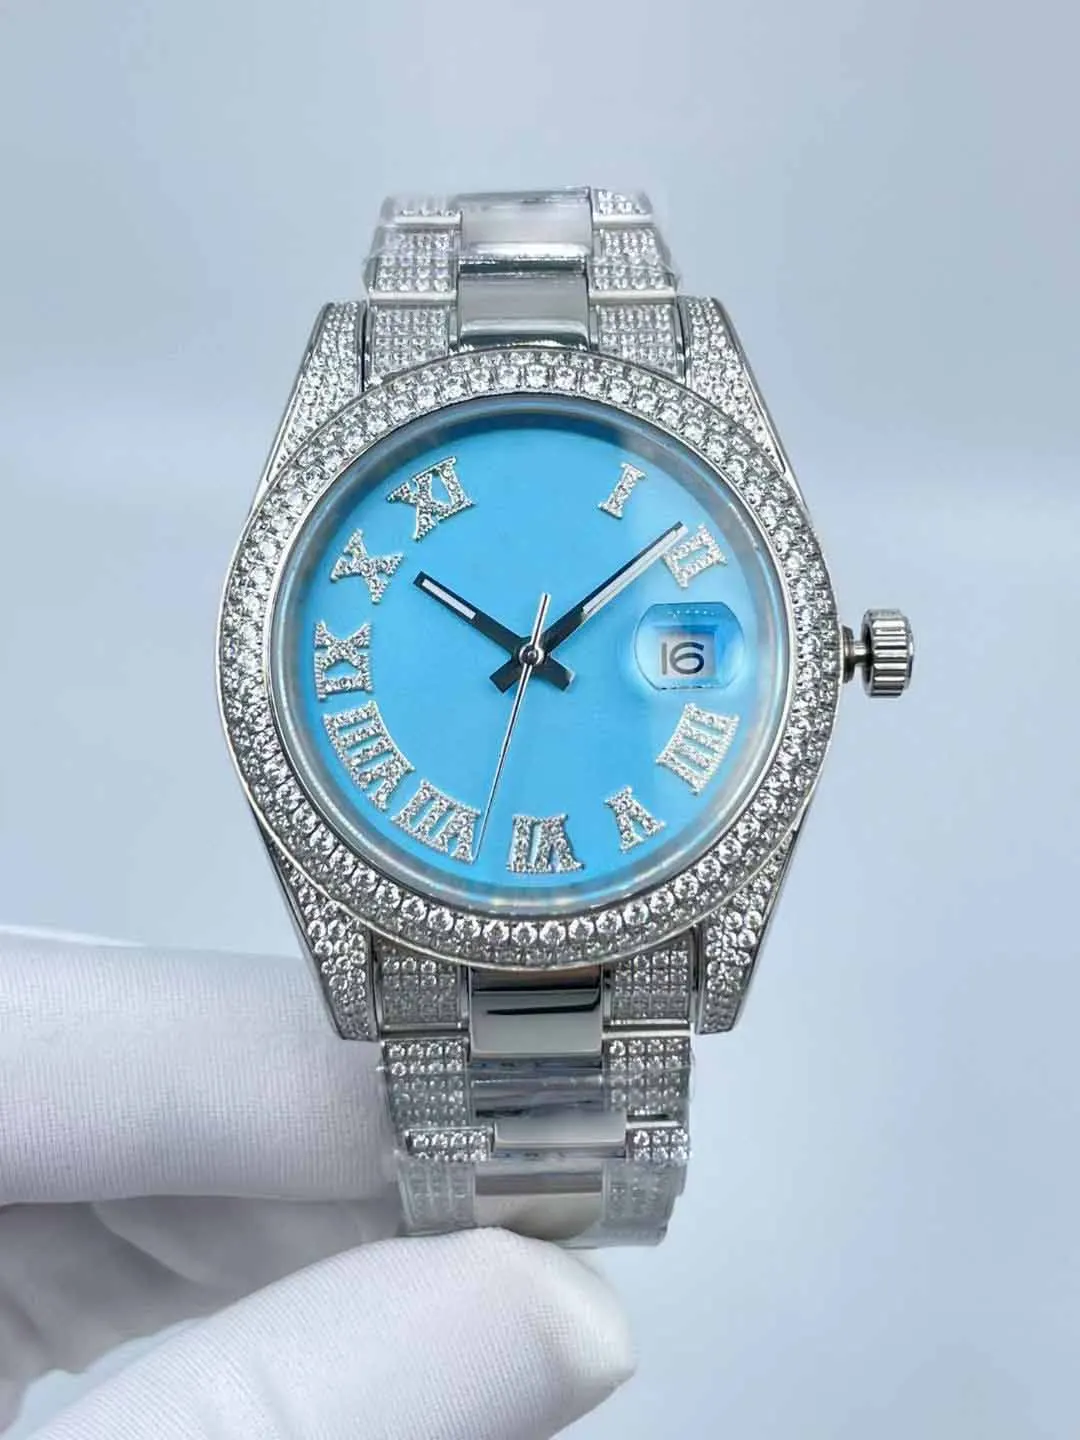 

"Watches for Men - 41mm Diamond dial with Roman numeral diamond scale"